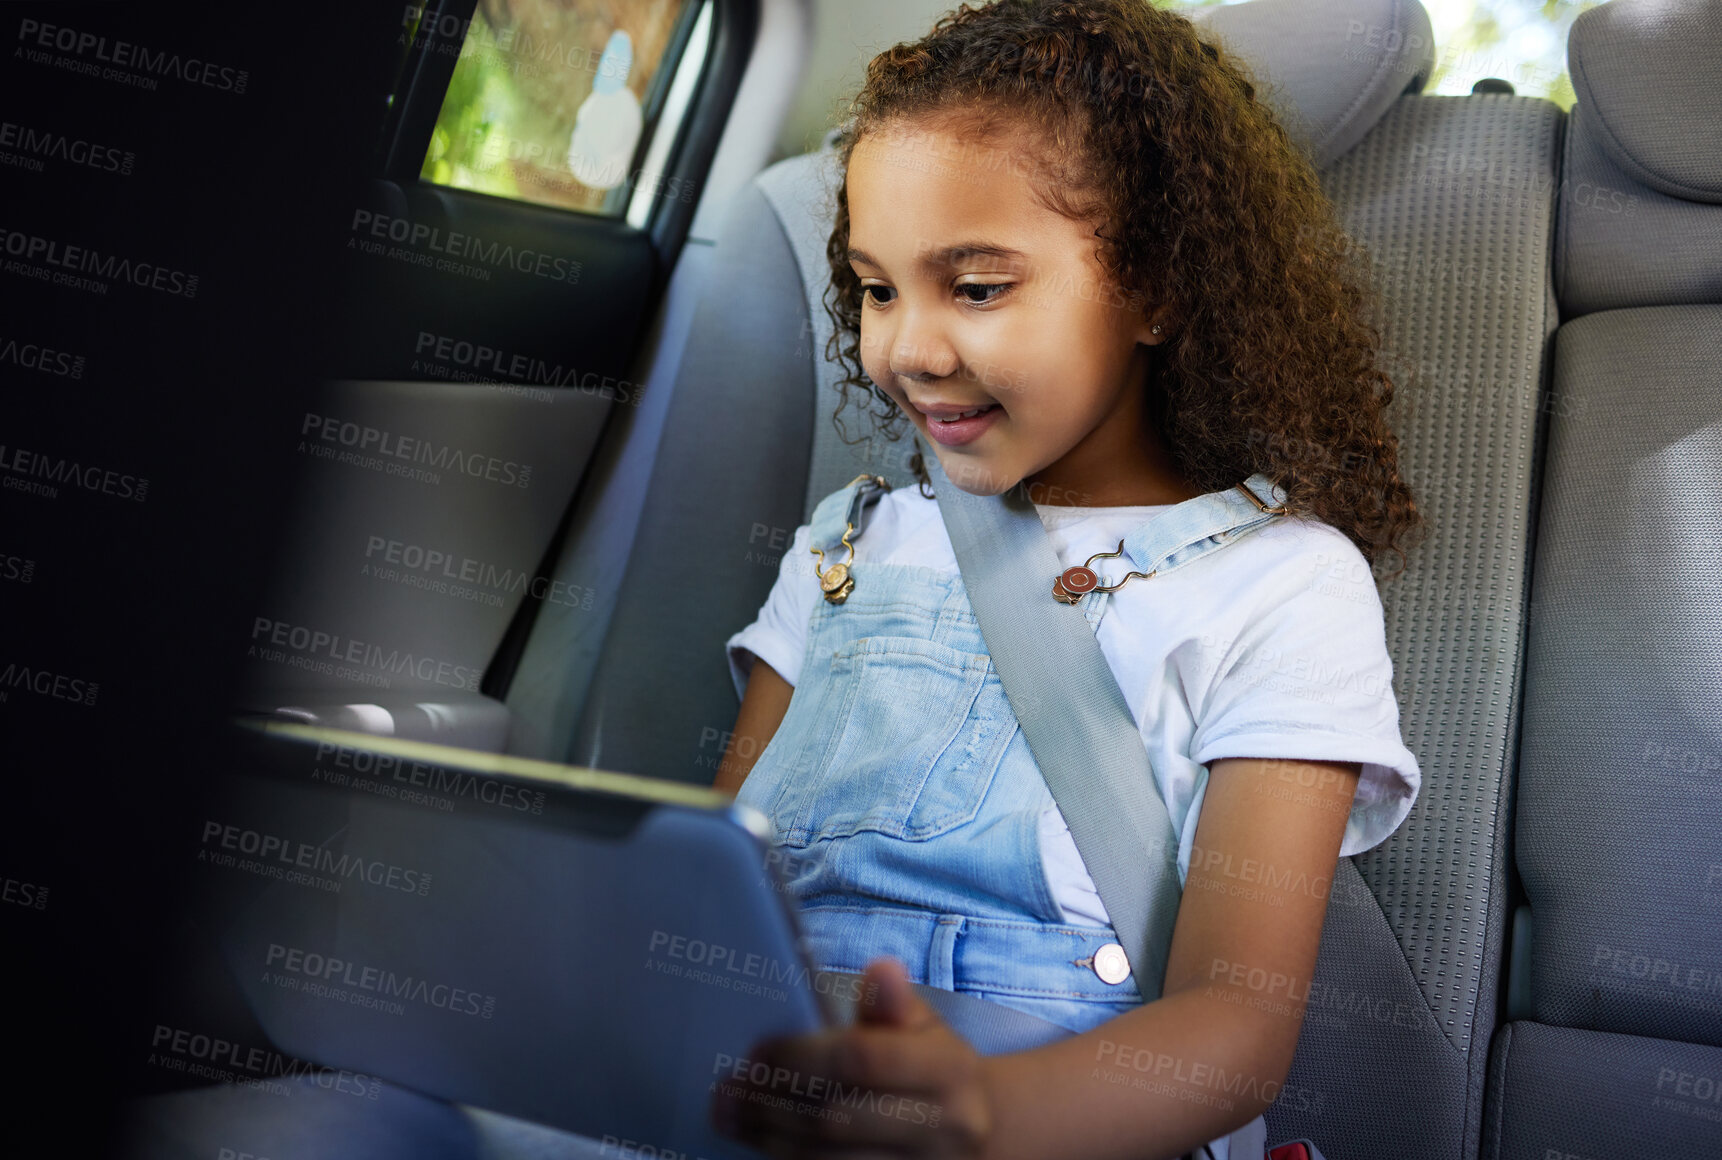 Buy stock photo Child in car, tablet and video on road trip with seatbelt for safety and device to play educational online game. Technology, internet browsing and travel, happy girl on backseat for drive or carpool.